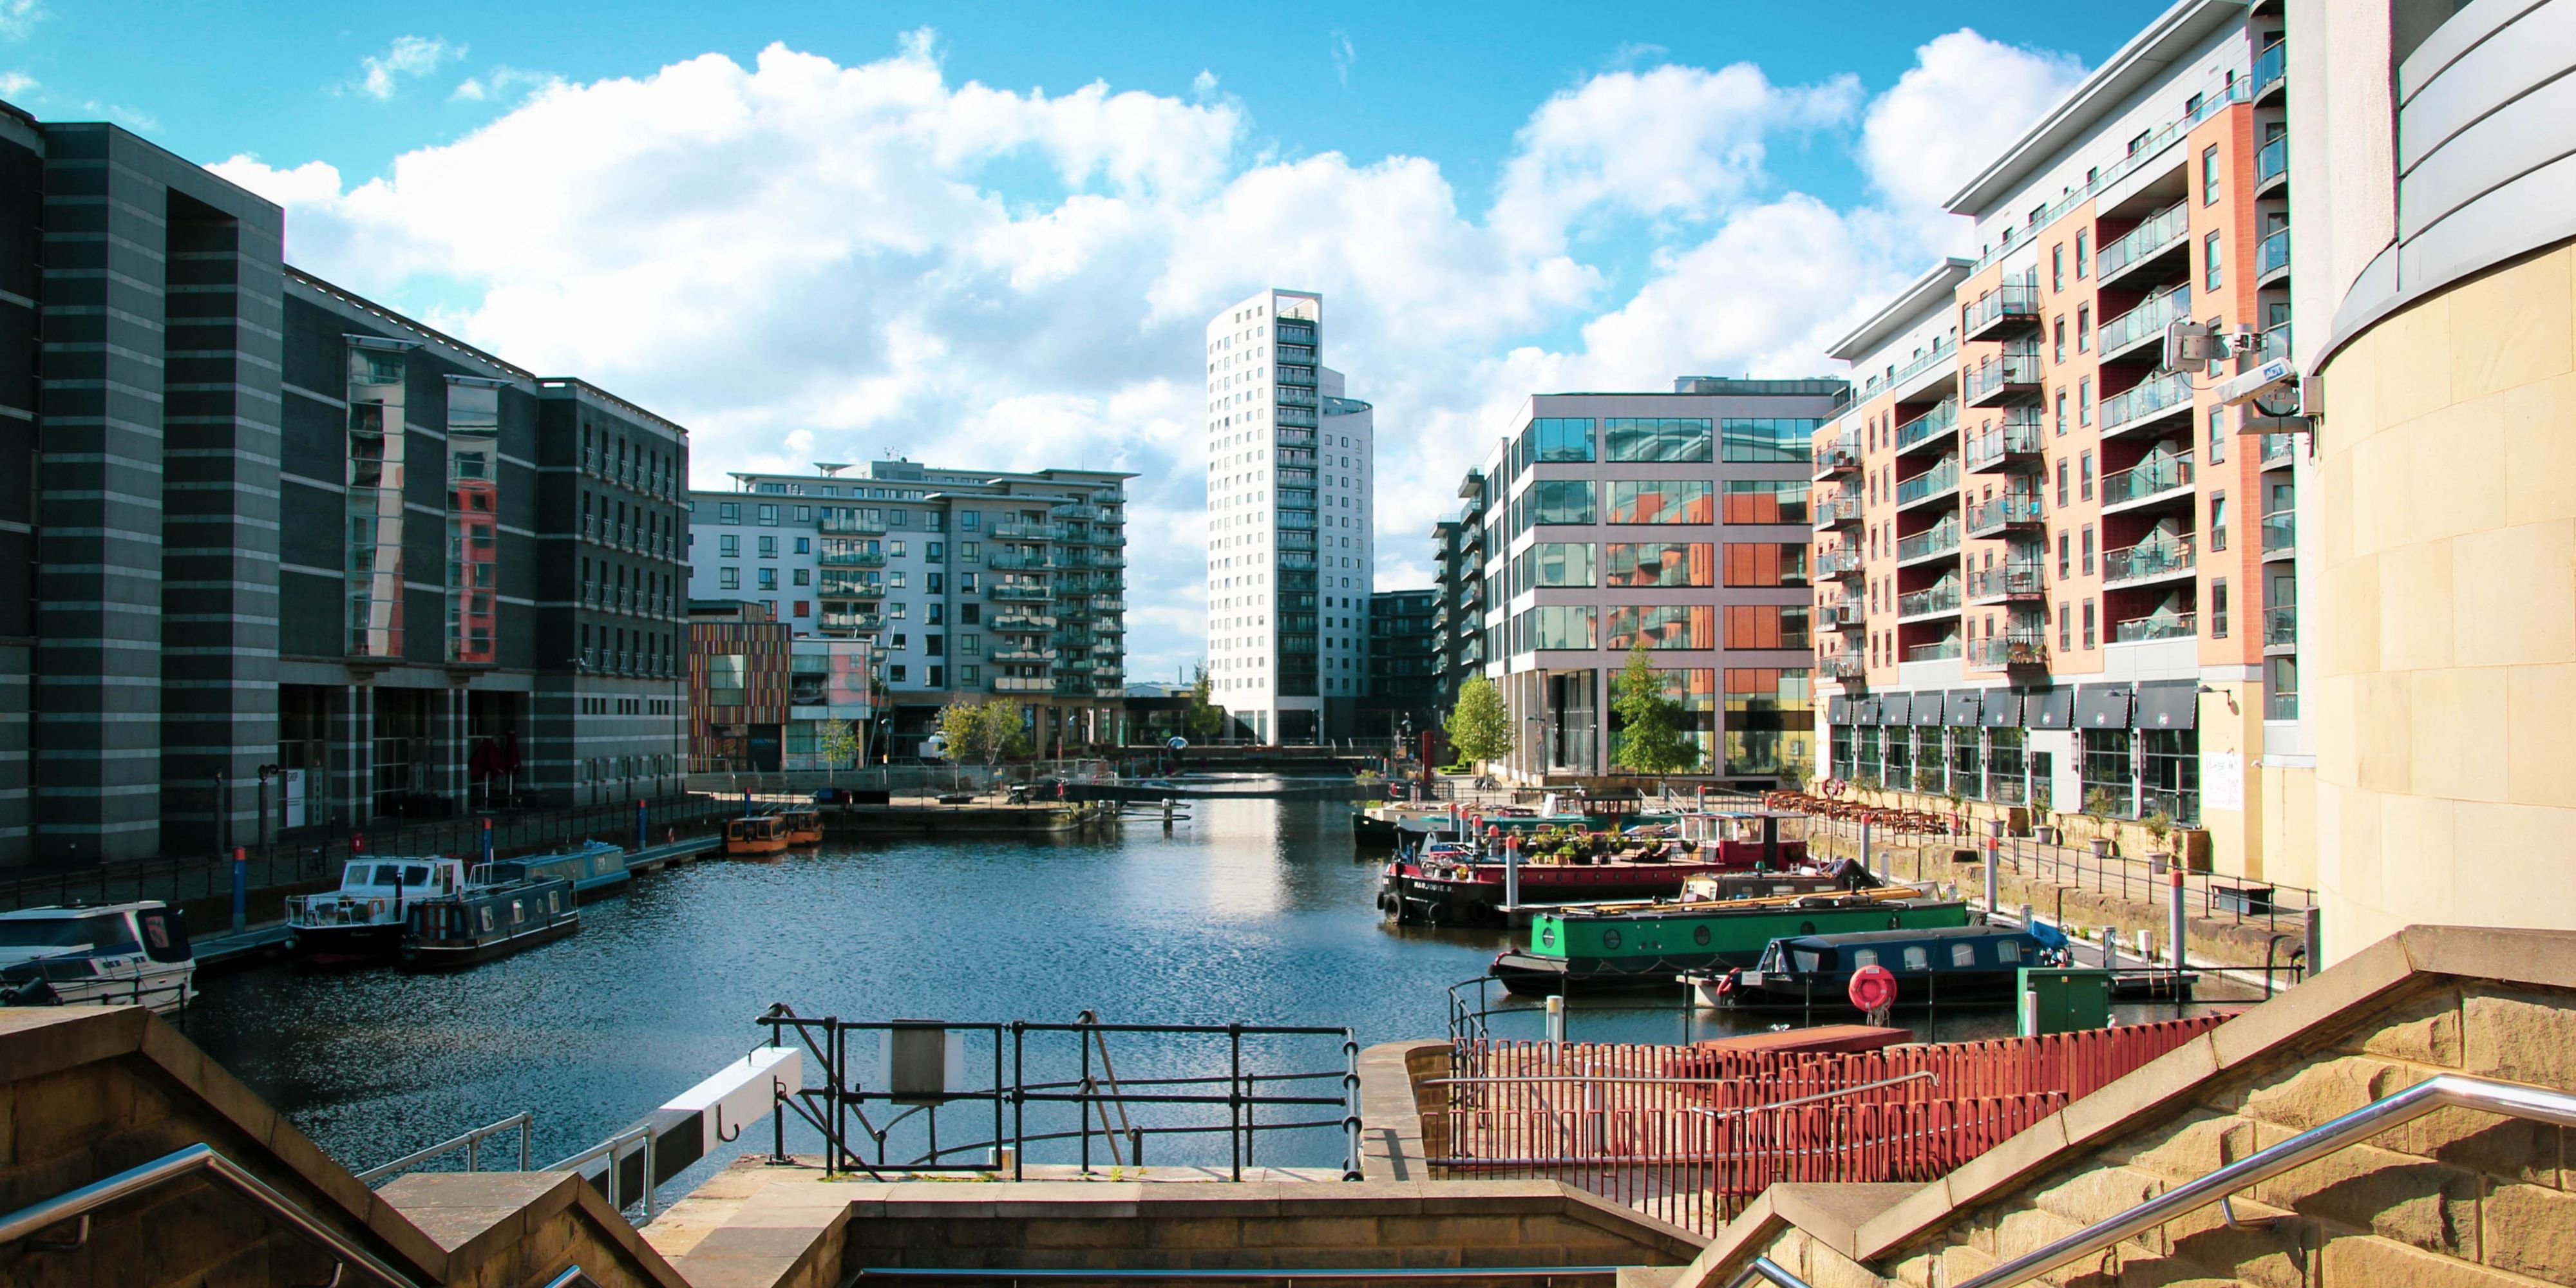 Shops, restaurants, attractions and nightlife are all within an easy walking distance from our location in Leeds Docks, right next to the Royal Armouries.